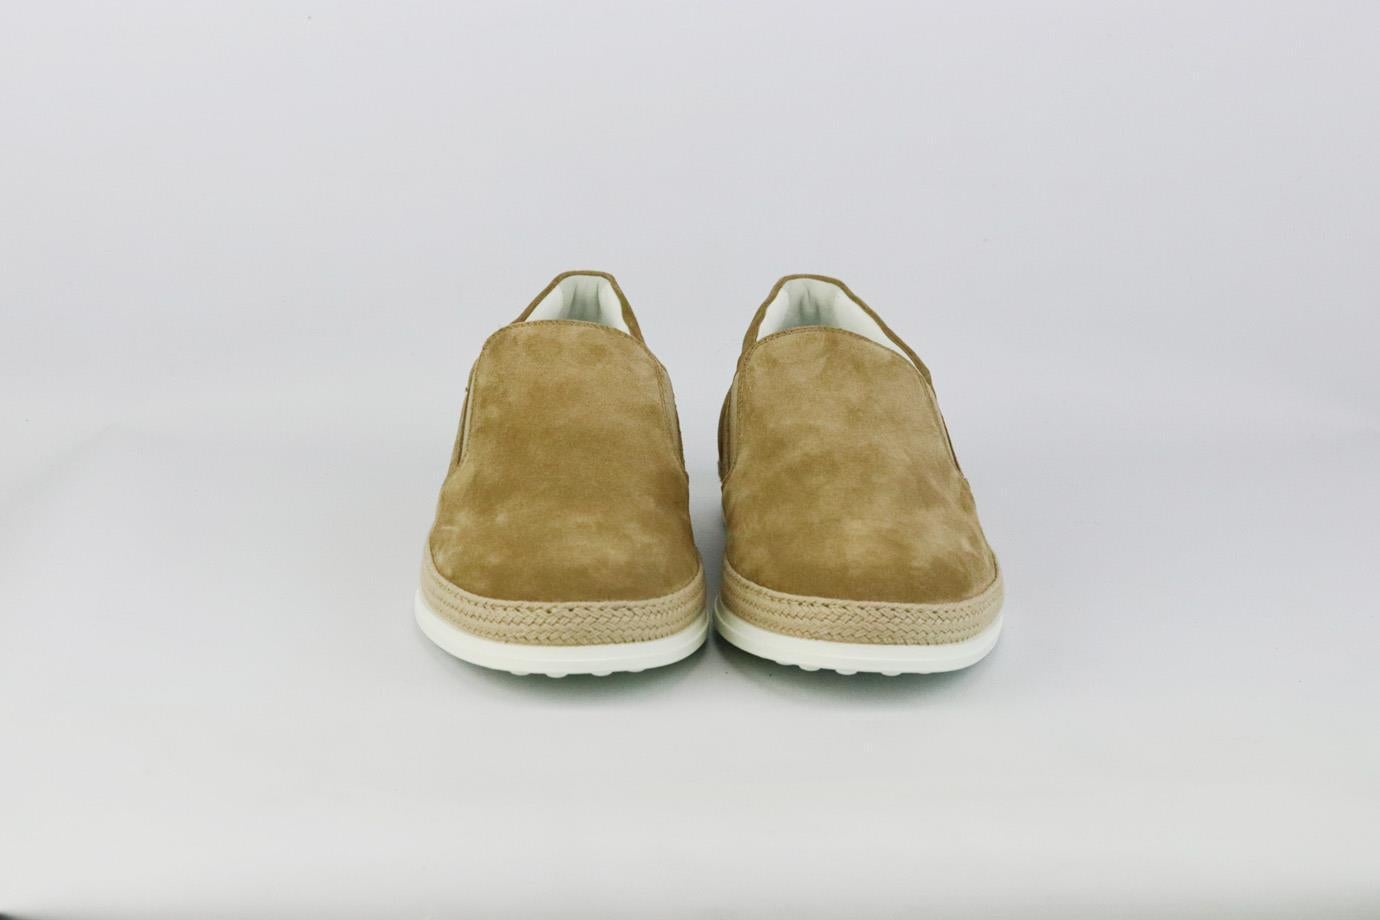 These shoes by Tod’s work well with pretty much anything, they're made from supple logo-printed suede and have elasticated inserts that make them easy to slip on and off. Rubber sole measures approximately 25 mm/ 1 inches. Beige suede. Slip on. Does